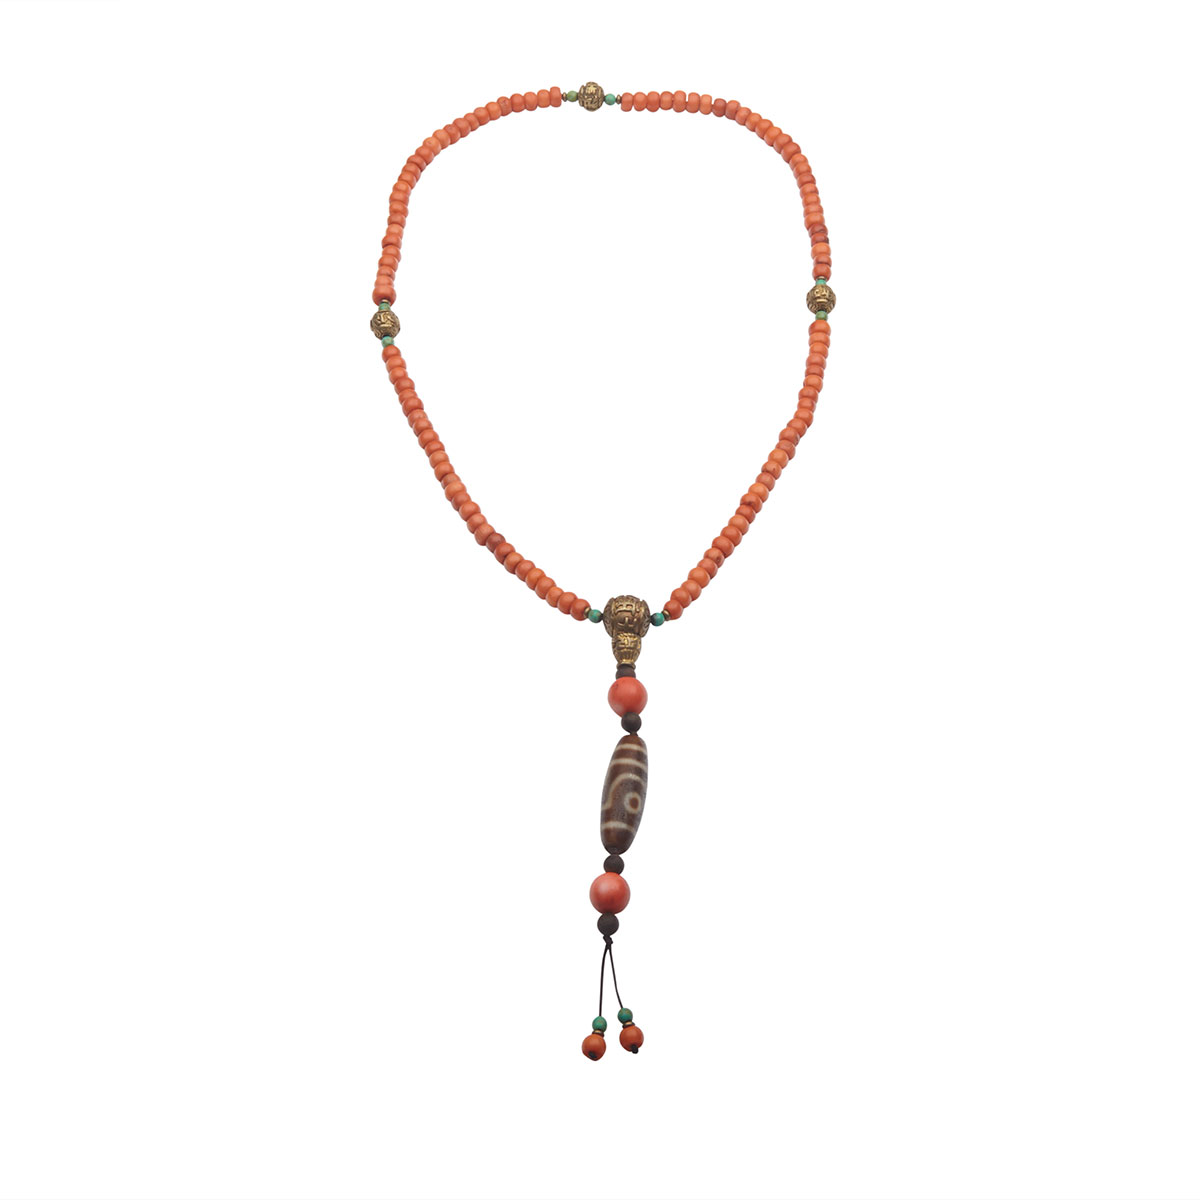 Coral and Hardstone Necklace, Tibet